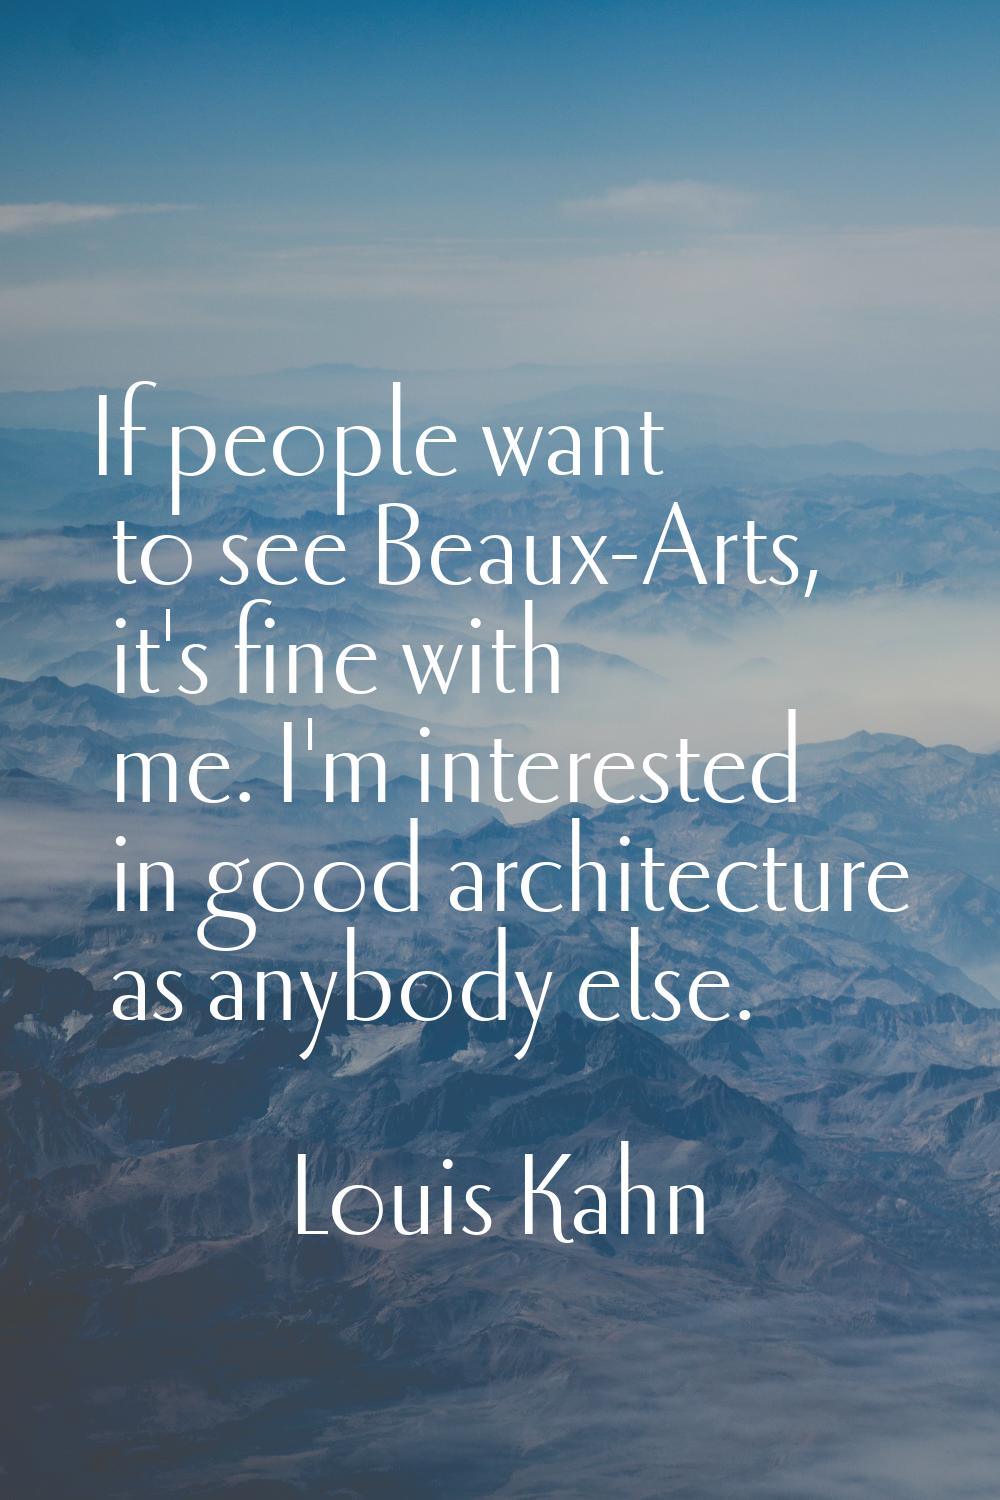 If people want to see Beaux-Arts, it's fine with me. I'm interested in good architecture as anybody